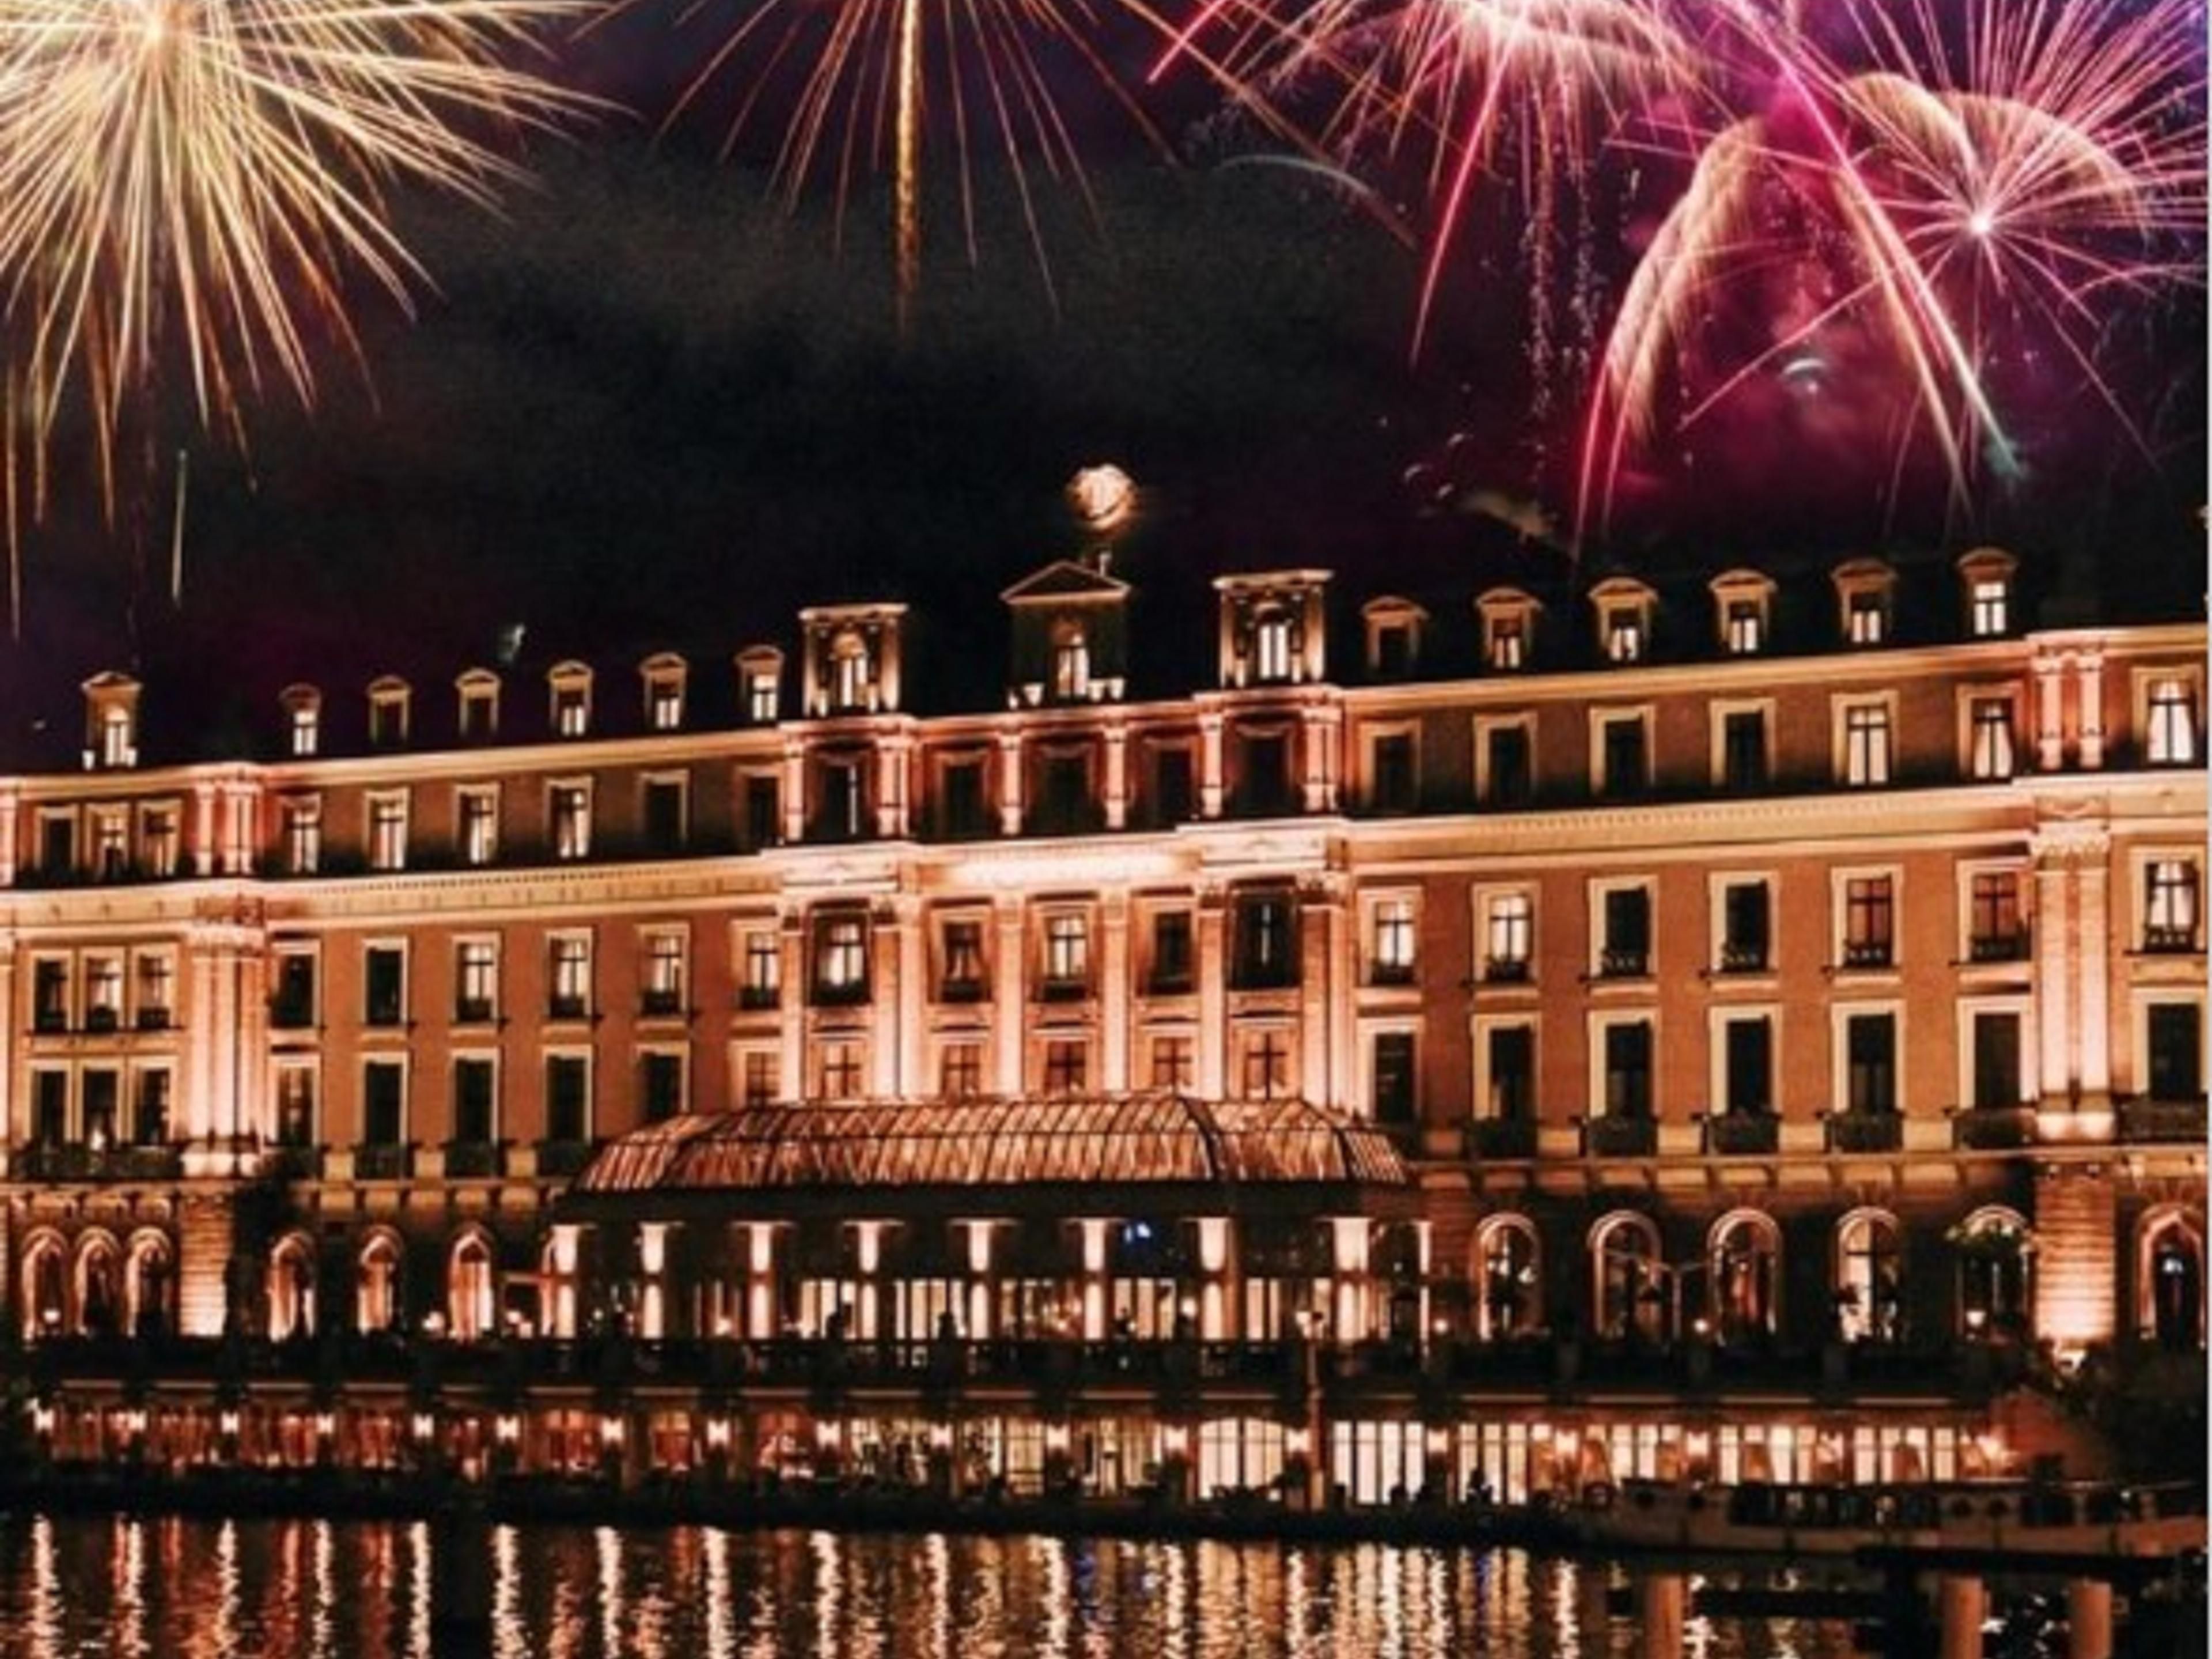 New Year’s Eve at the Amstel Hotel